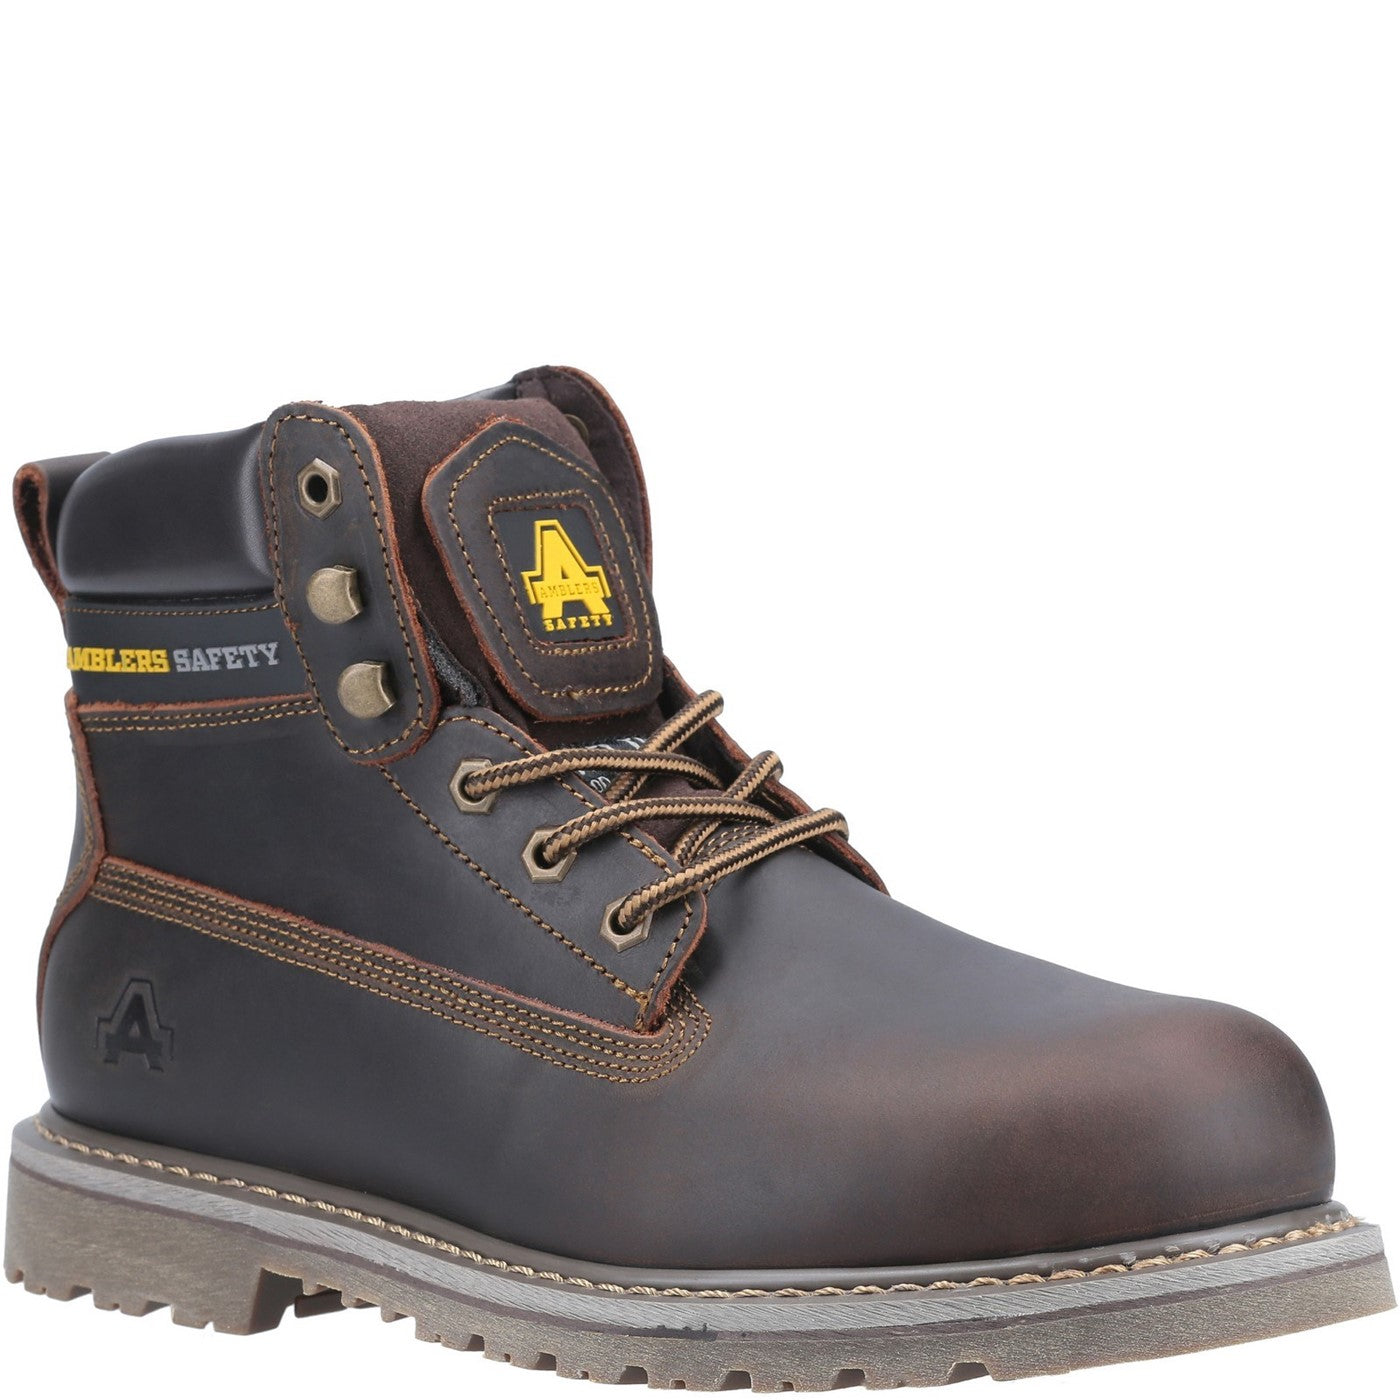 Unisex Amblers Safety FS164 Industrial Safety Boot